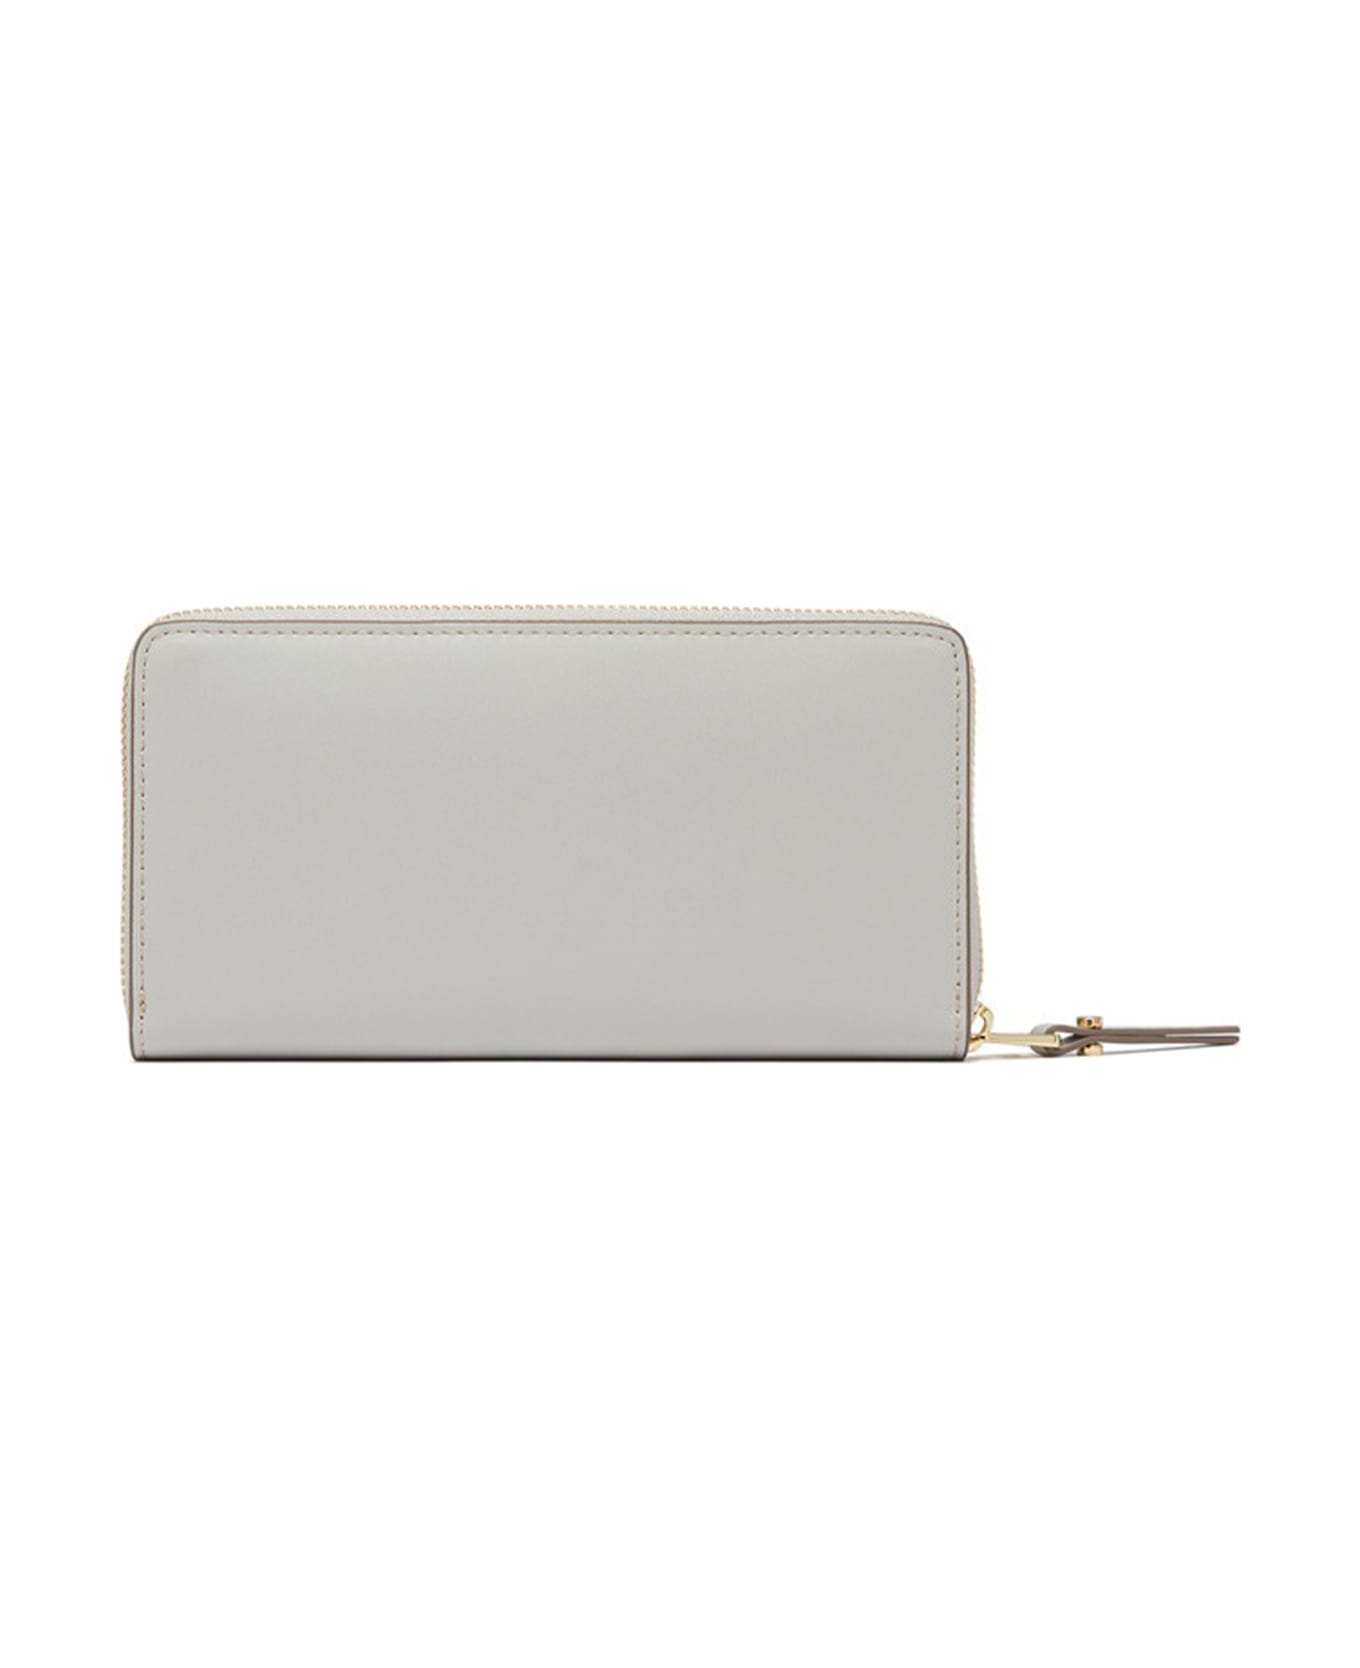 Gianni Chiarini Wallets Wallet In Smooth Cowhide Leather - SILICE